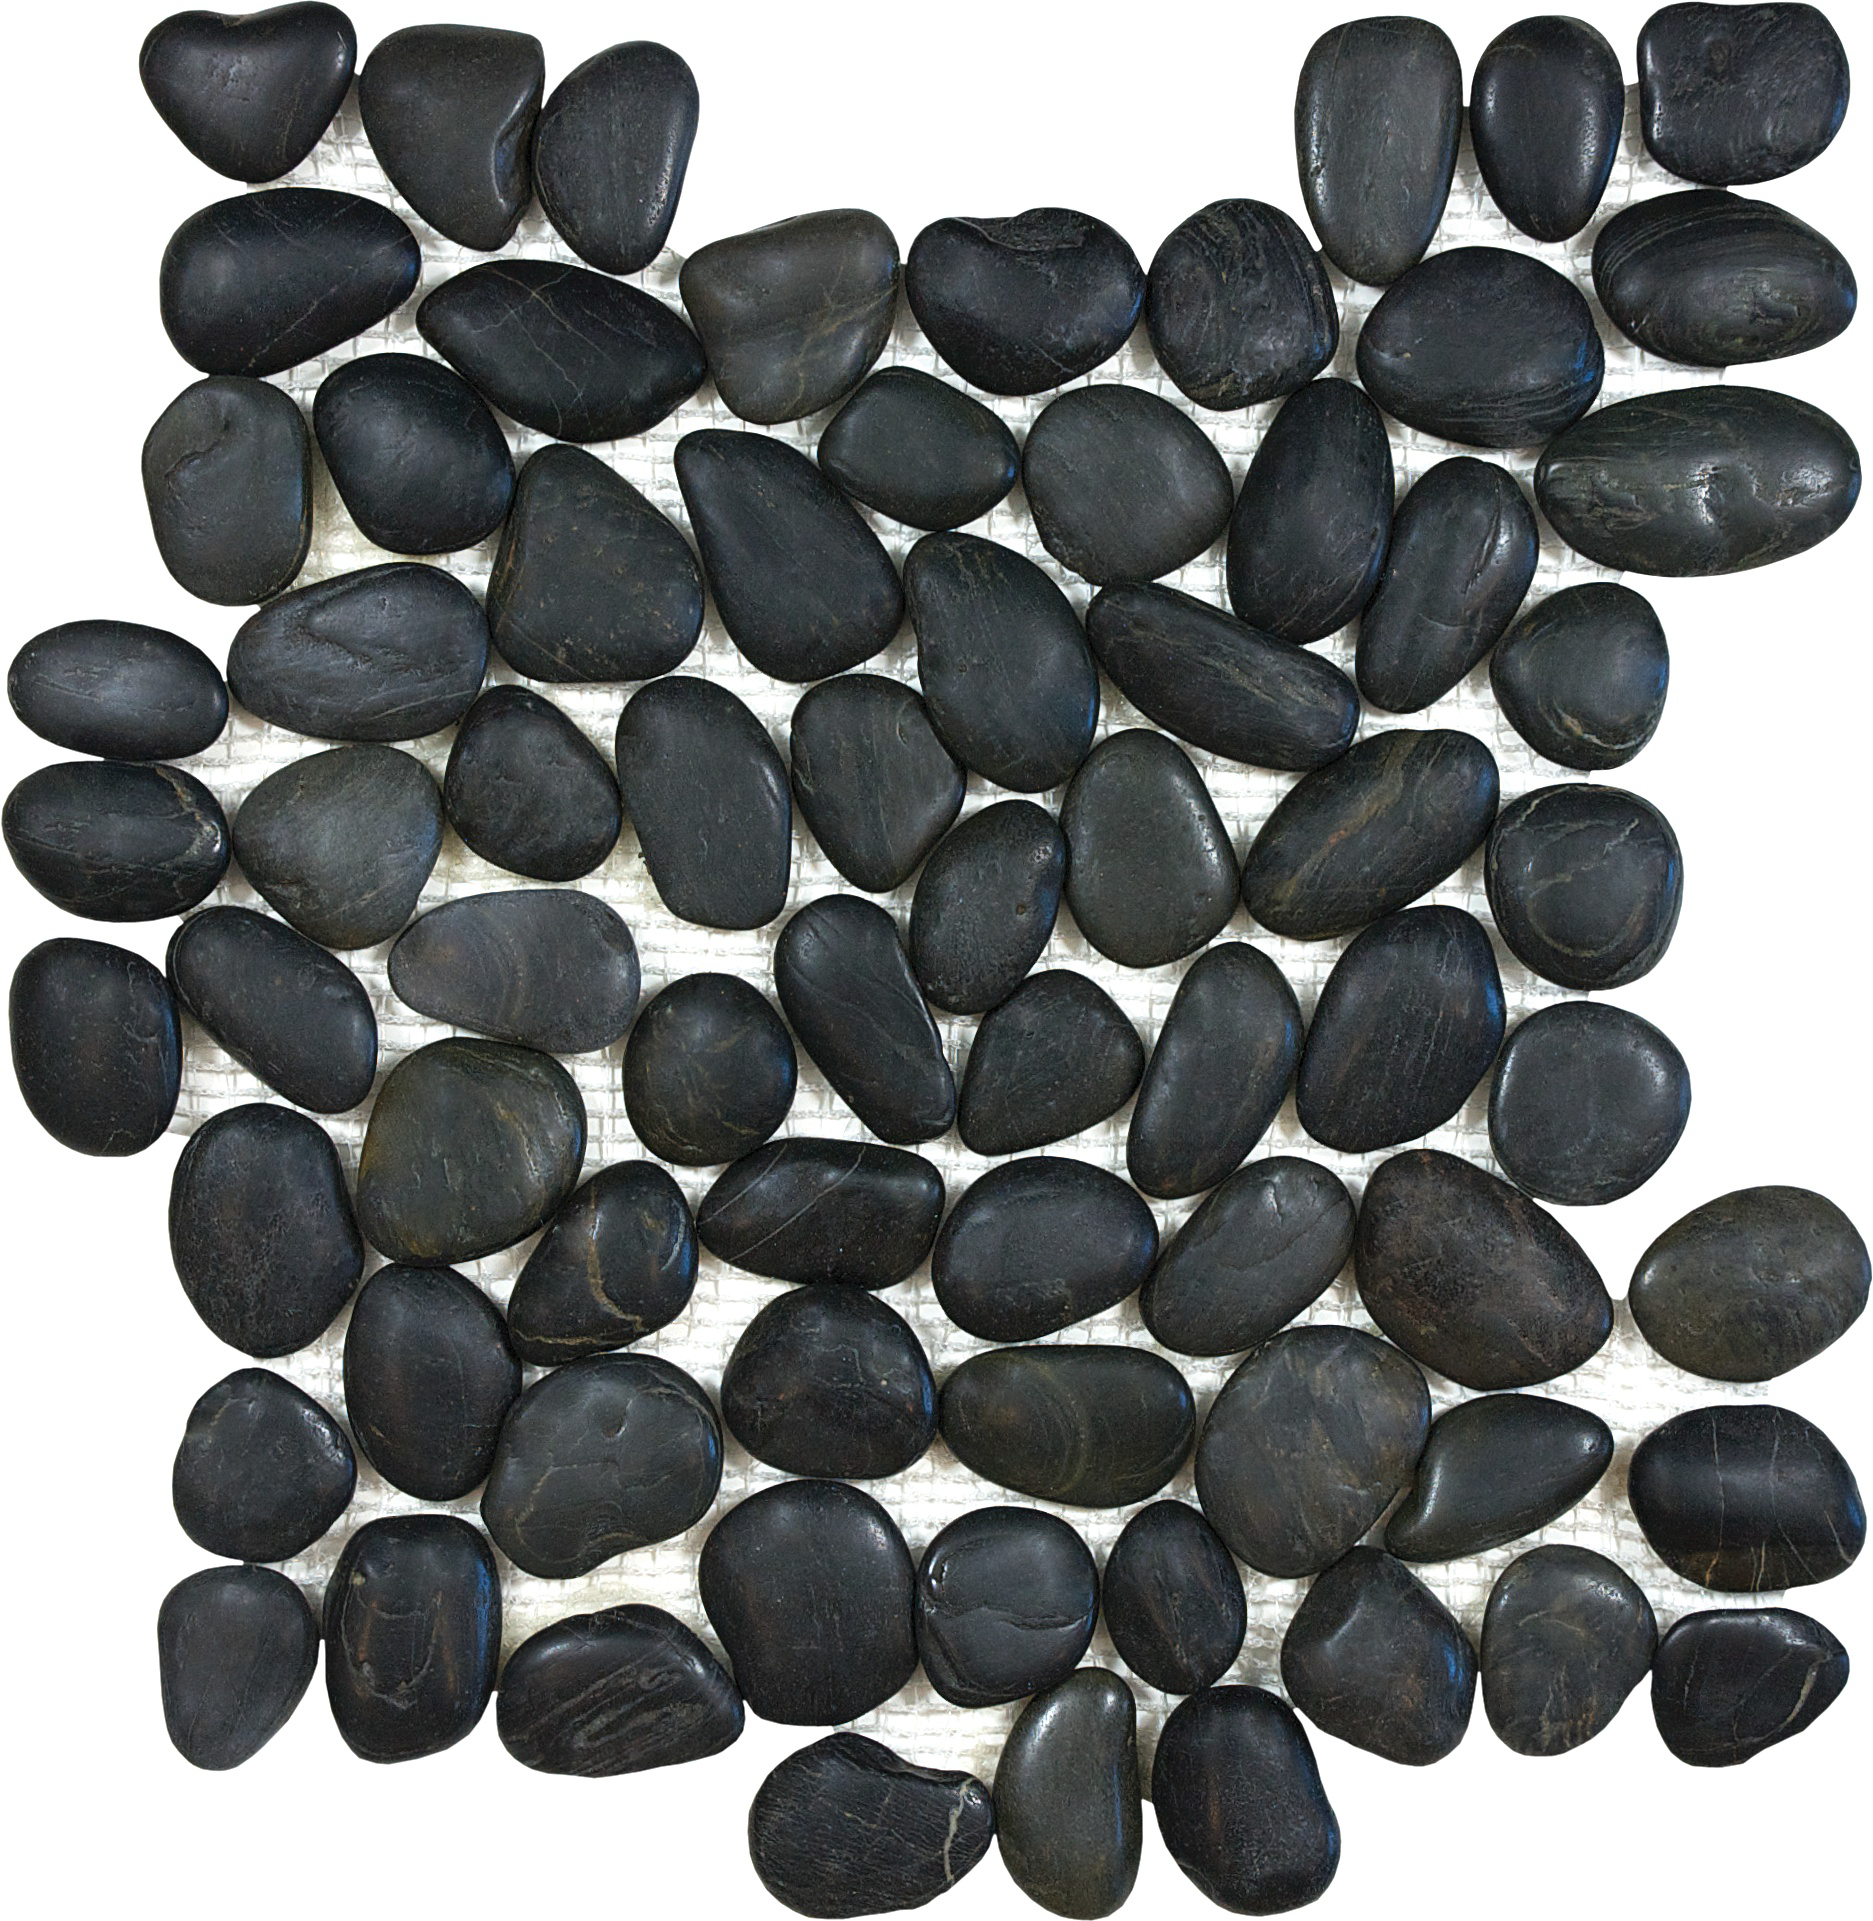 pebble tahitian black sand natural pebble pattern natural stone mosaic from zen anatolia collection distributed by surface group international matte finish straight edge edge mesh shape